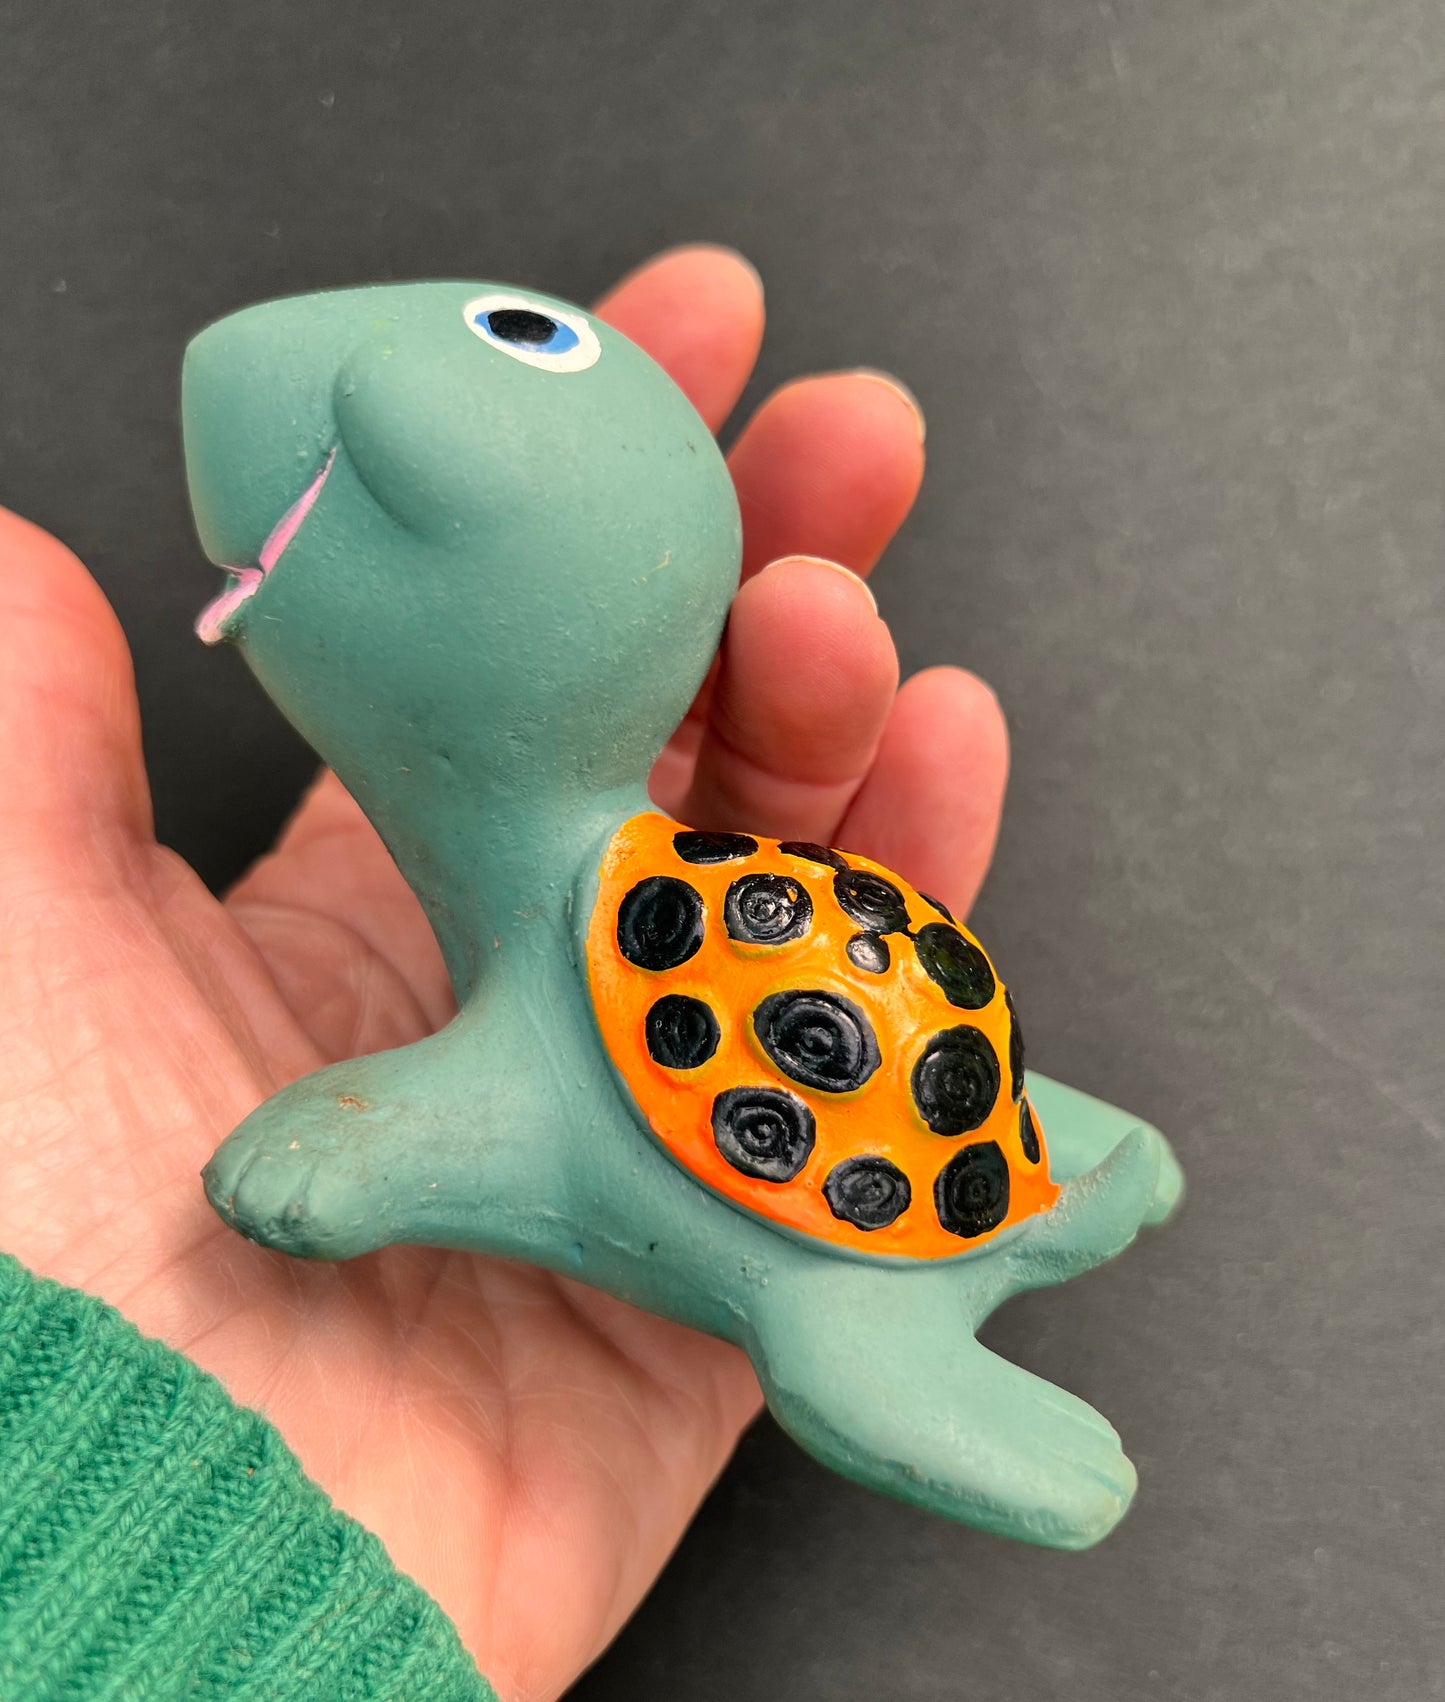 Strange Squeeky Squeezy Rubber Turtle Toy